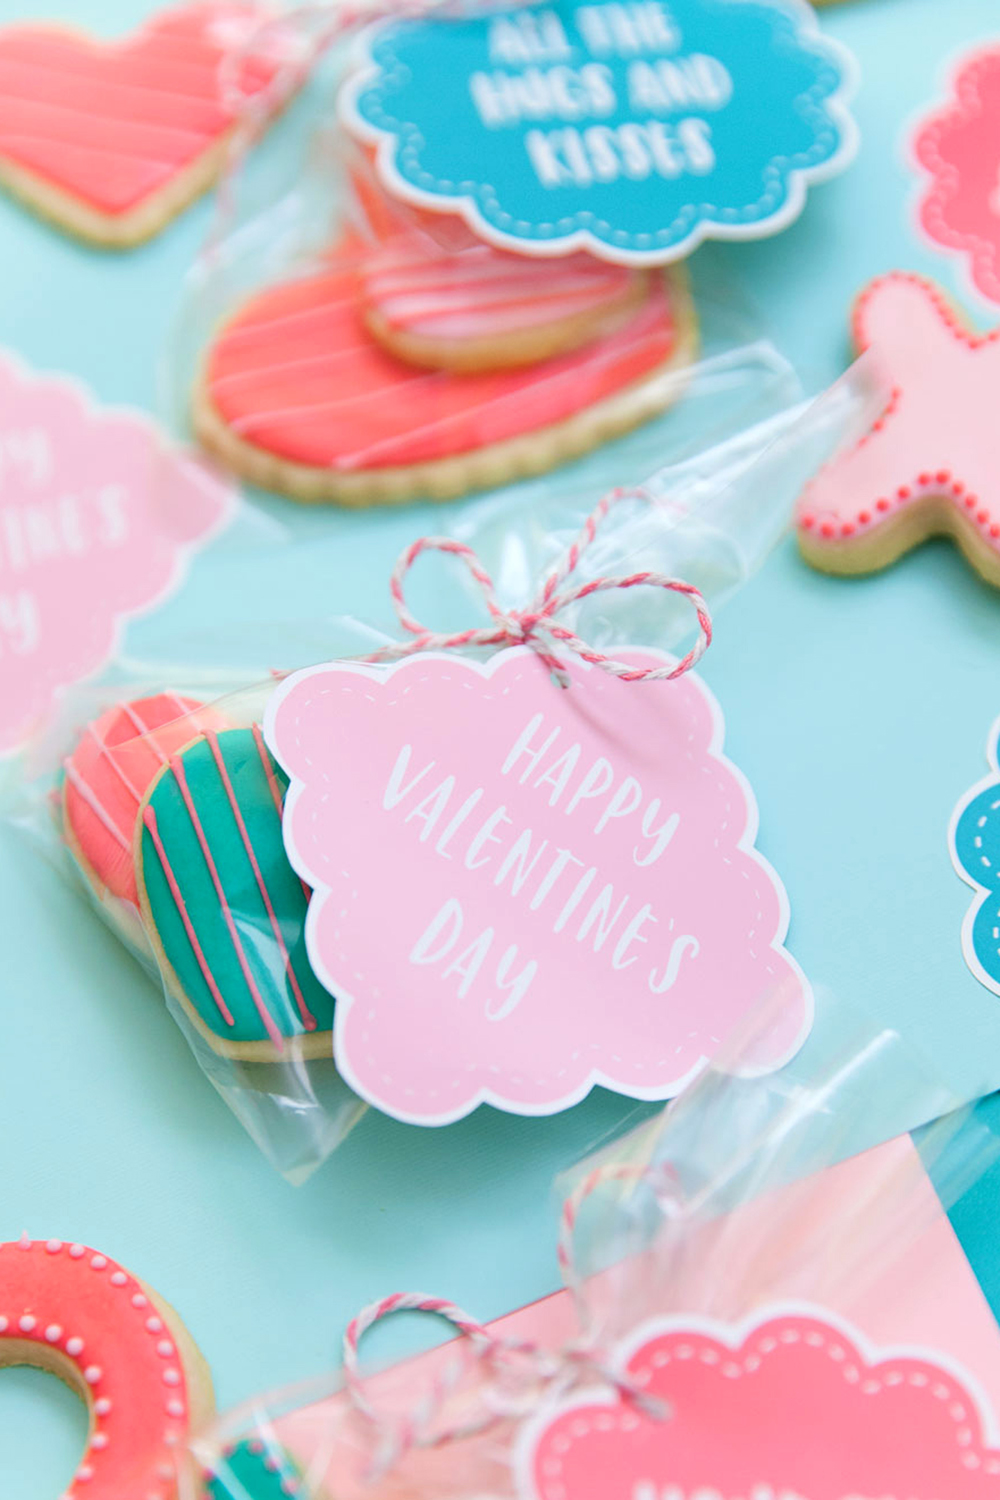 These free printable Valentine's are perfect for any cookie for treat!  Valentine's day, DIY, Cookies